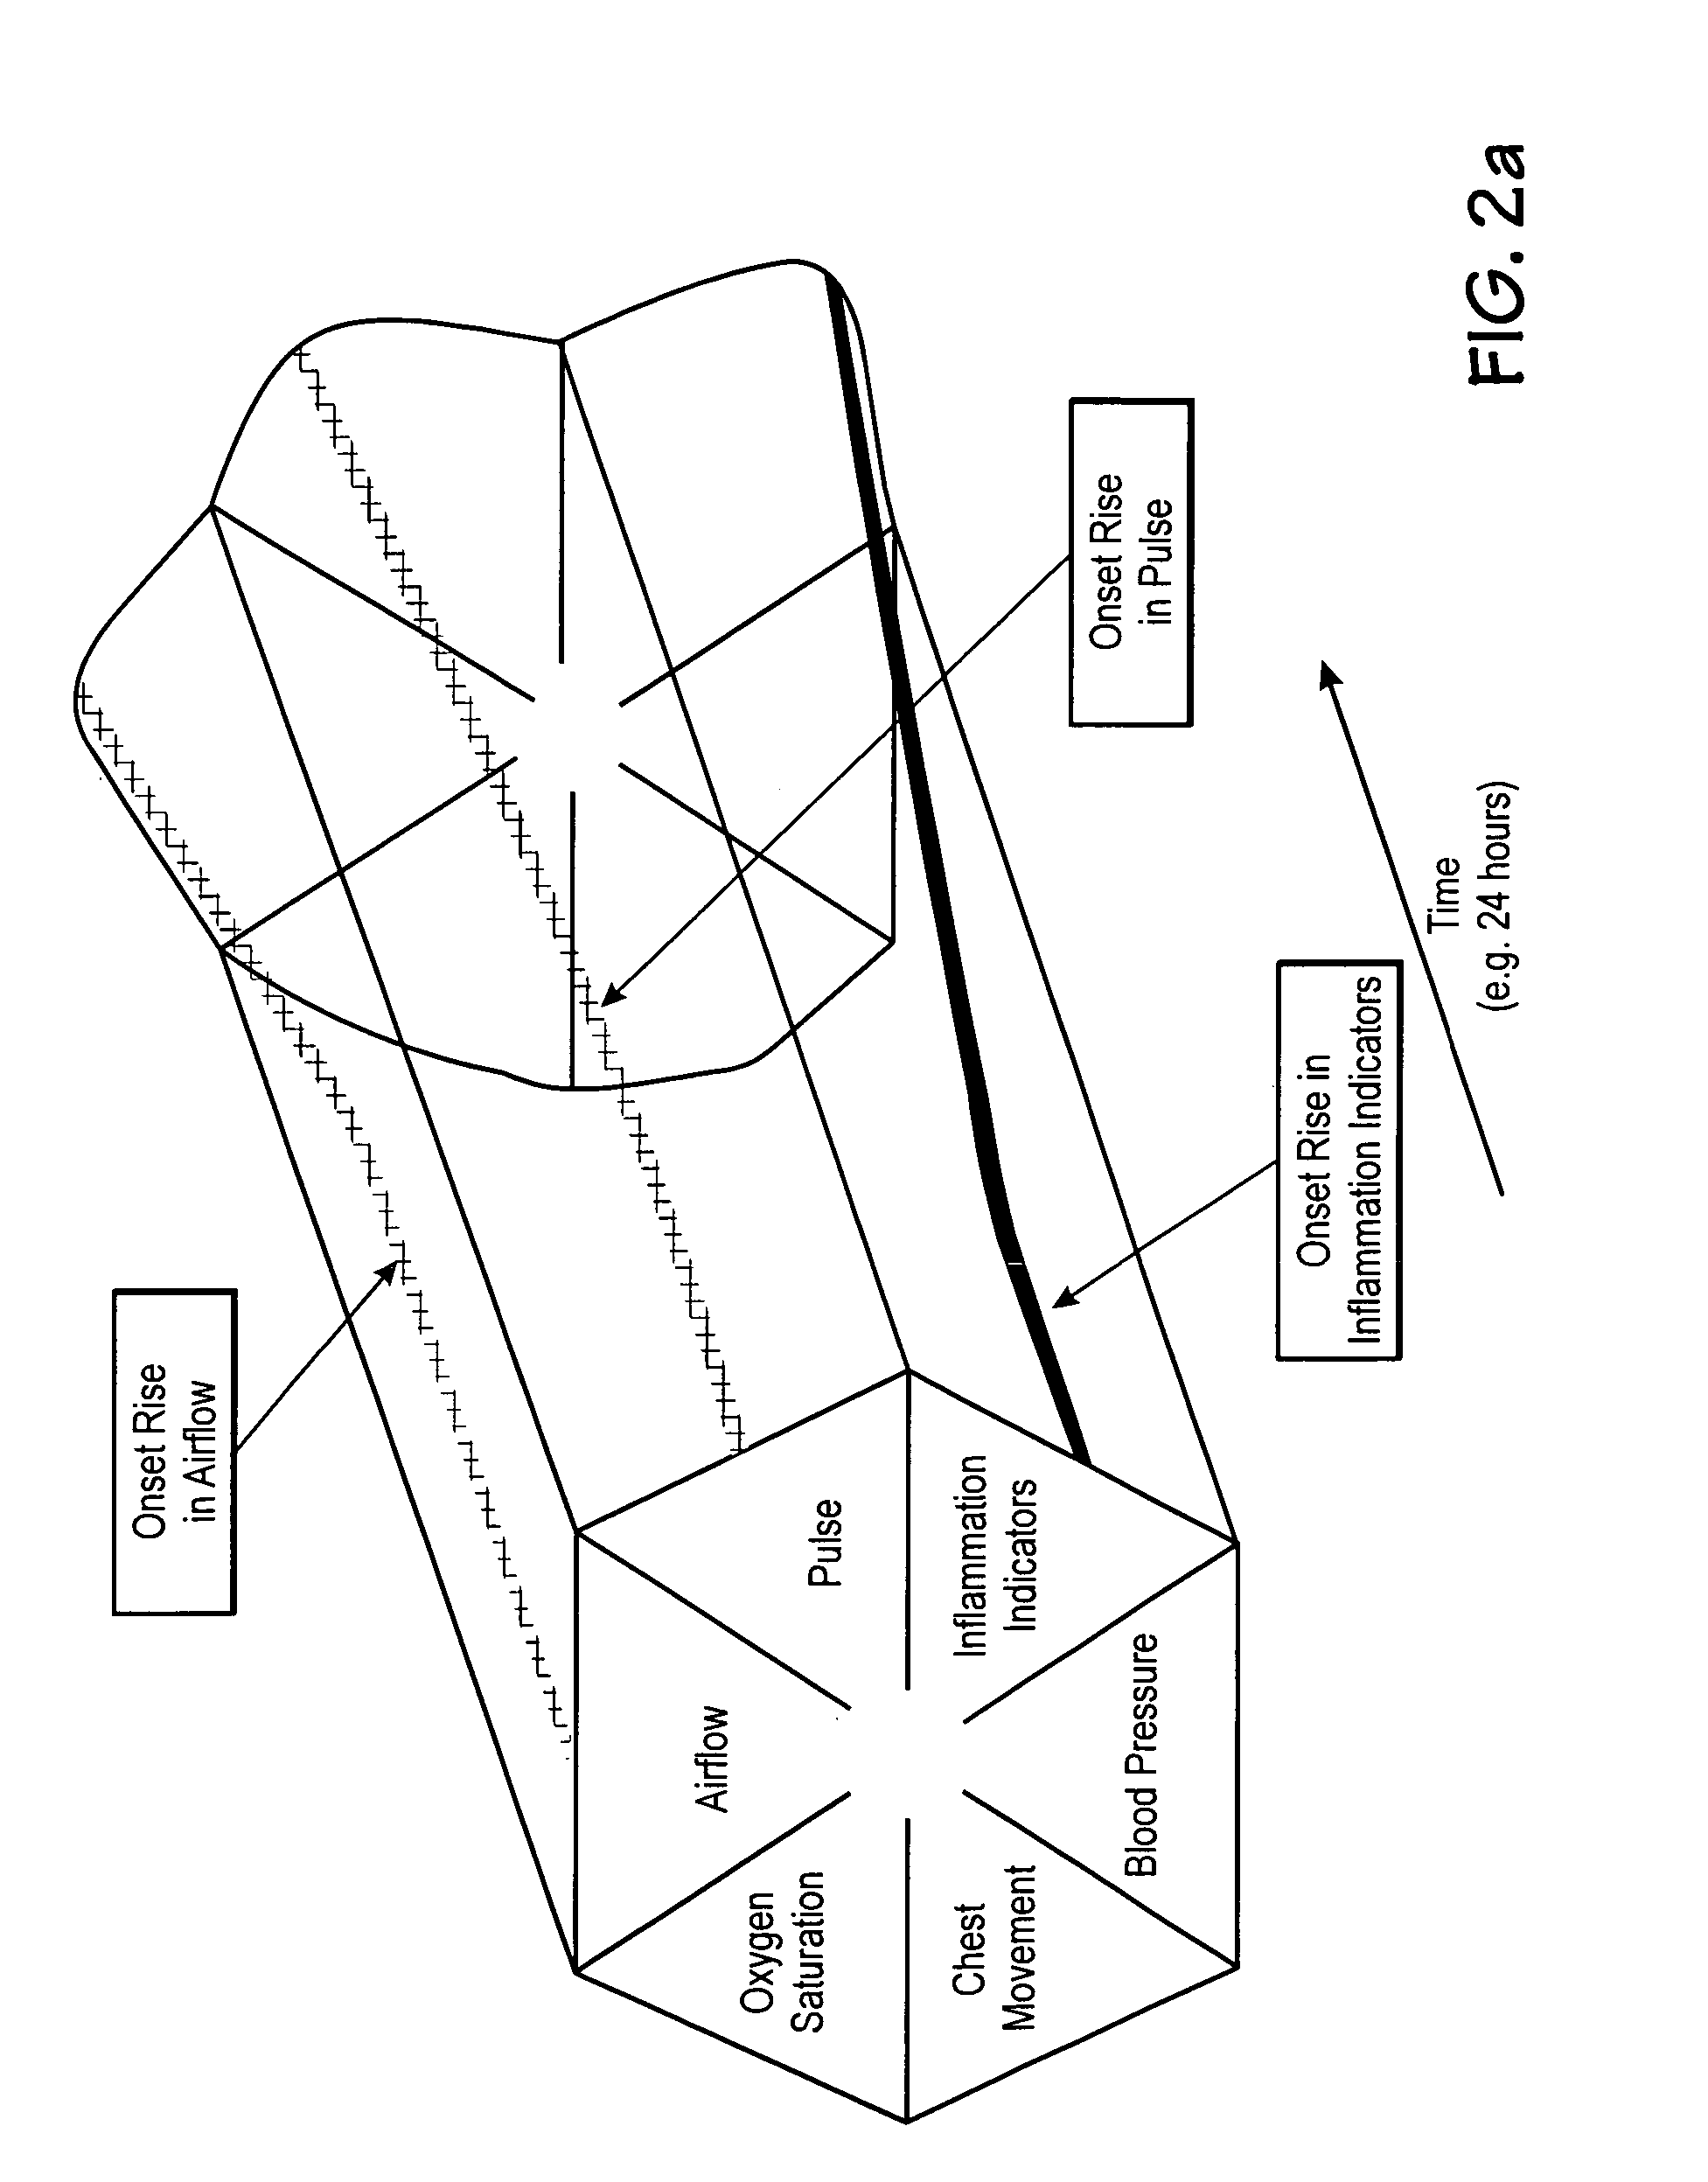 Microprocessor system for the analysis of physiologic and financial datasets